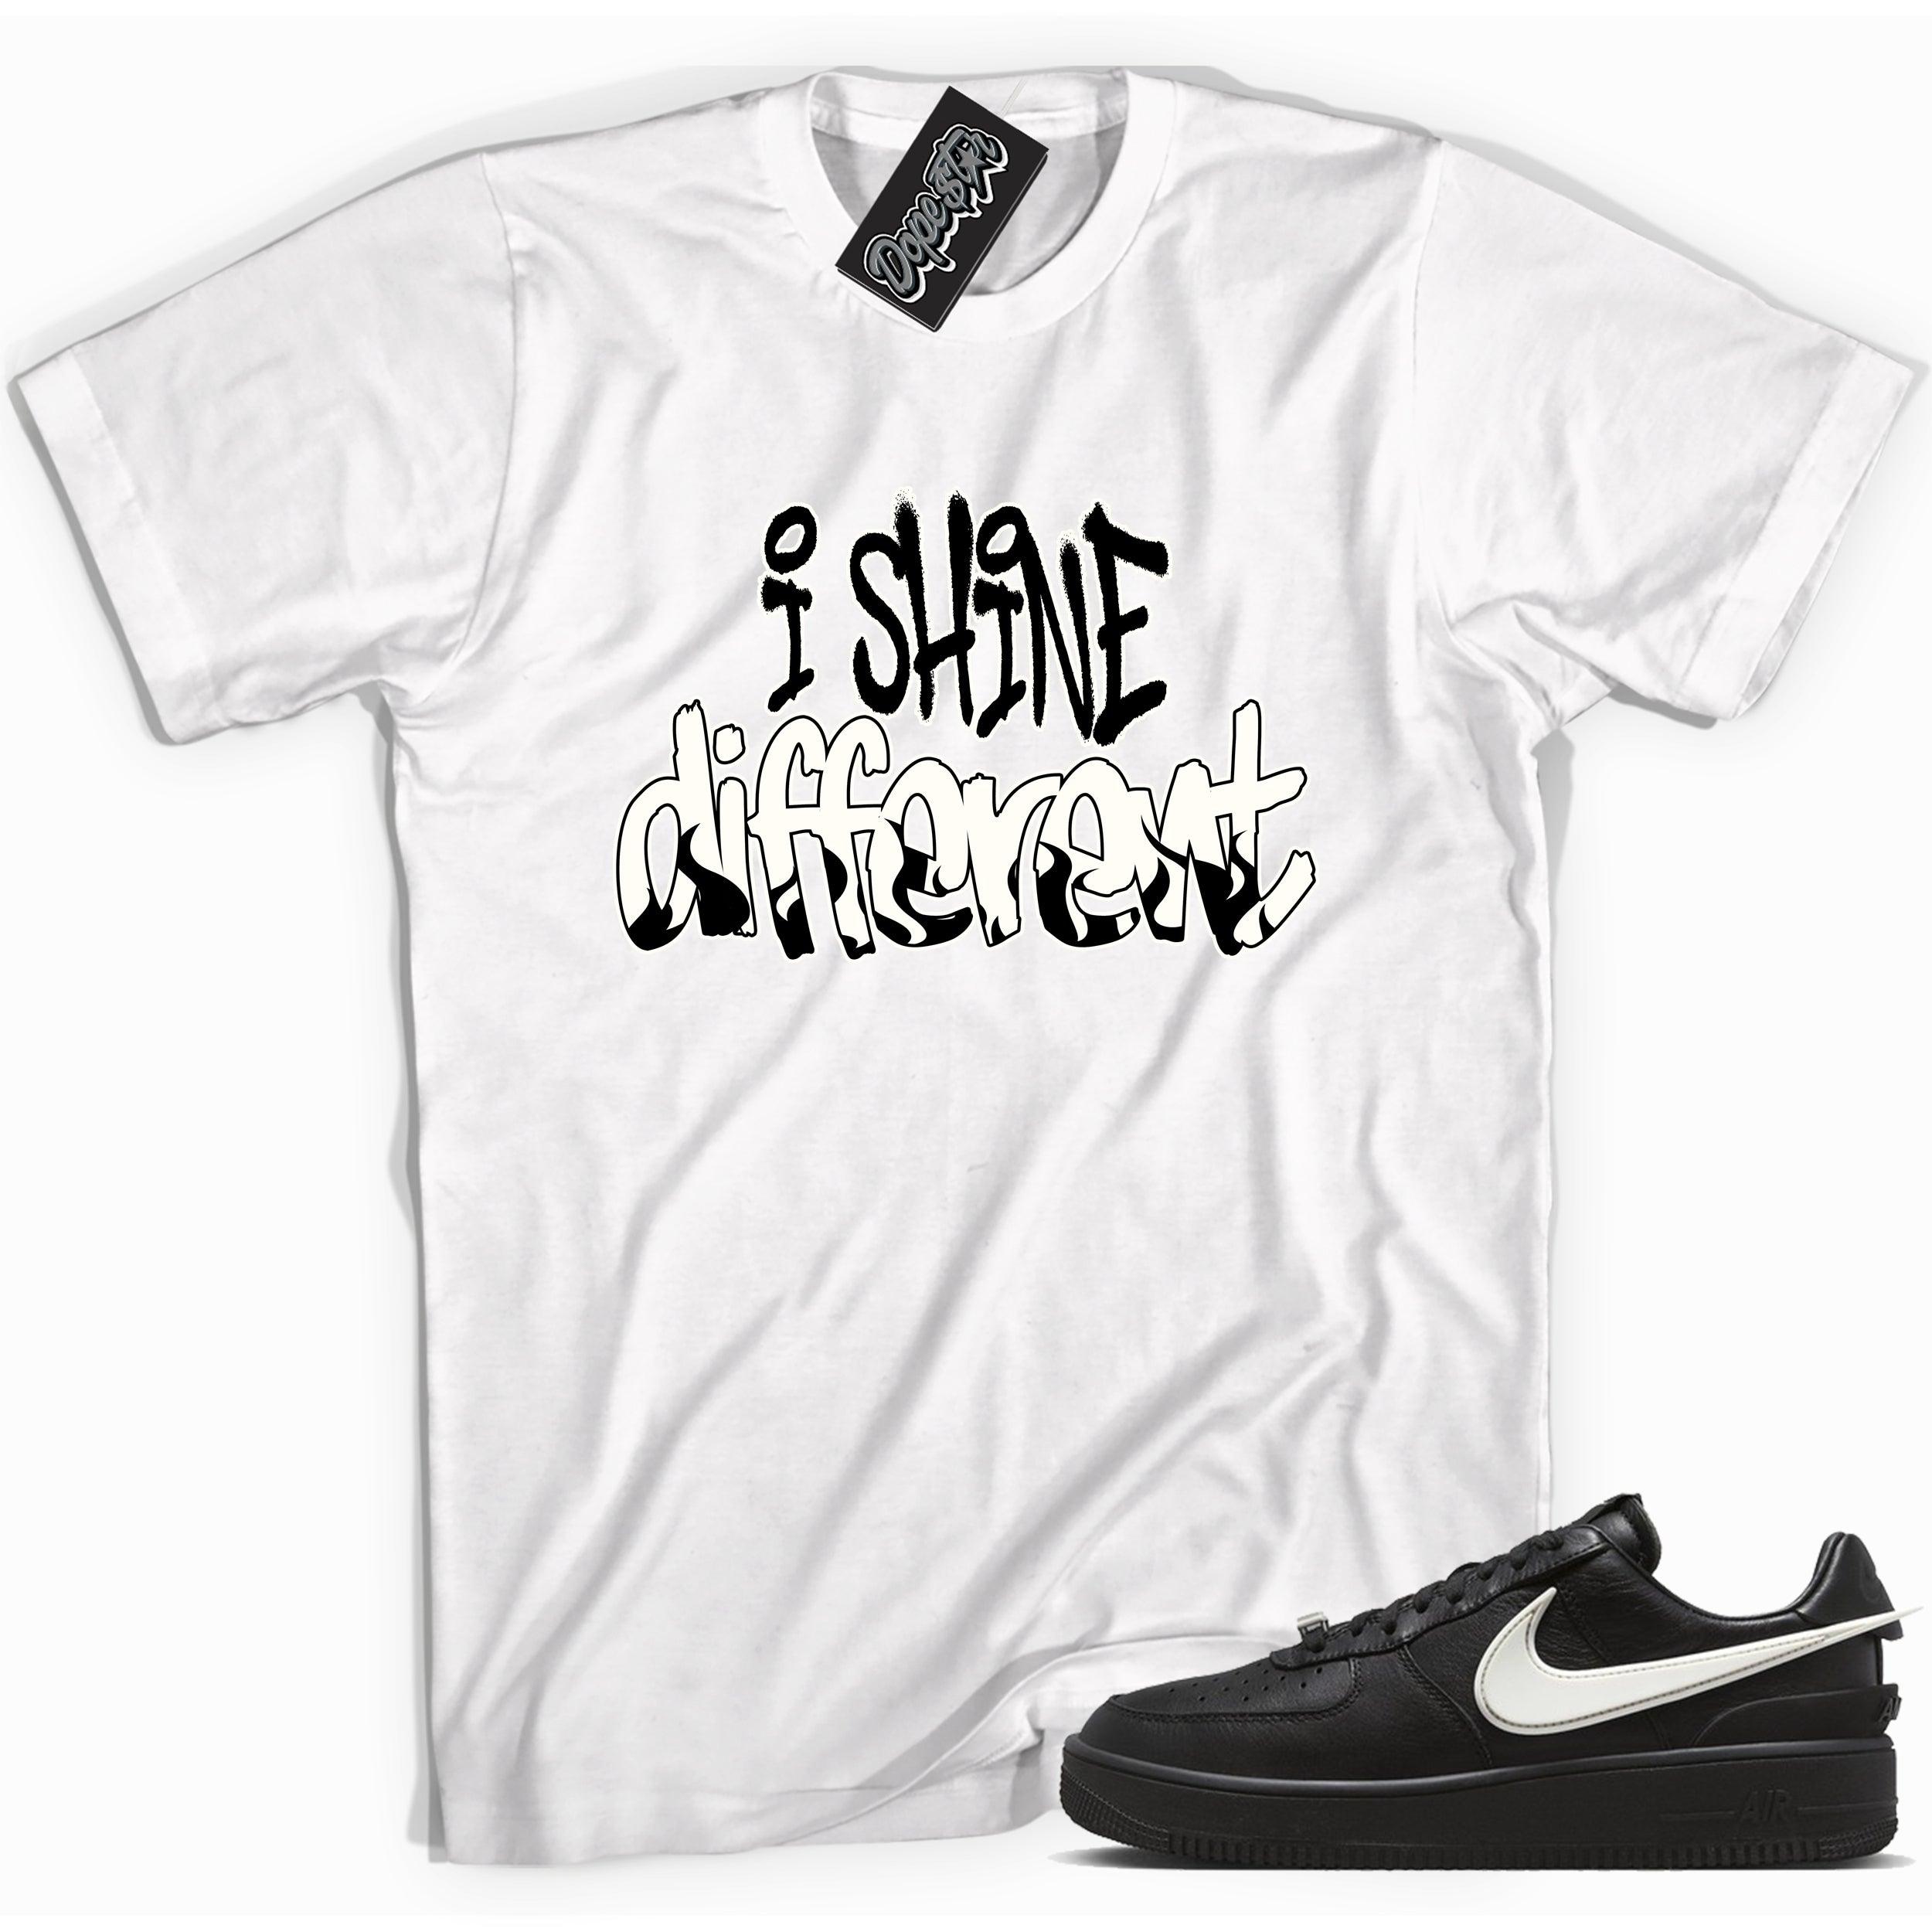 Cool white graphic tee with 'i shine different' print, that perfectly matches Nike Air Force 1 Low SP Ambush Phantom sneakers.